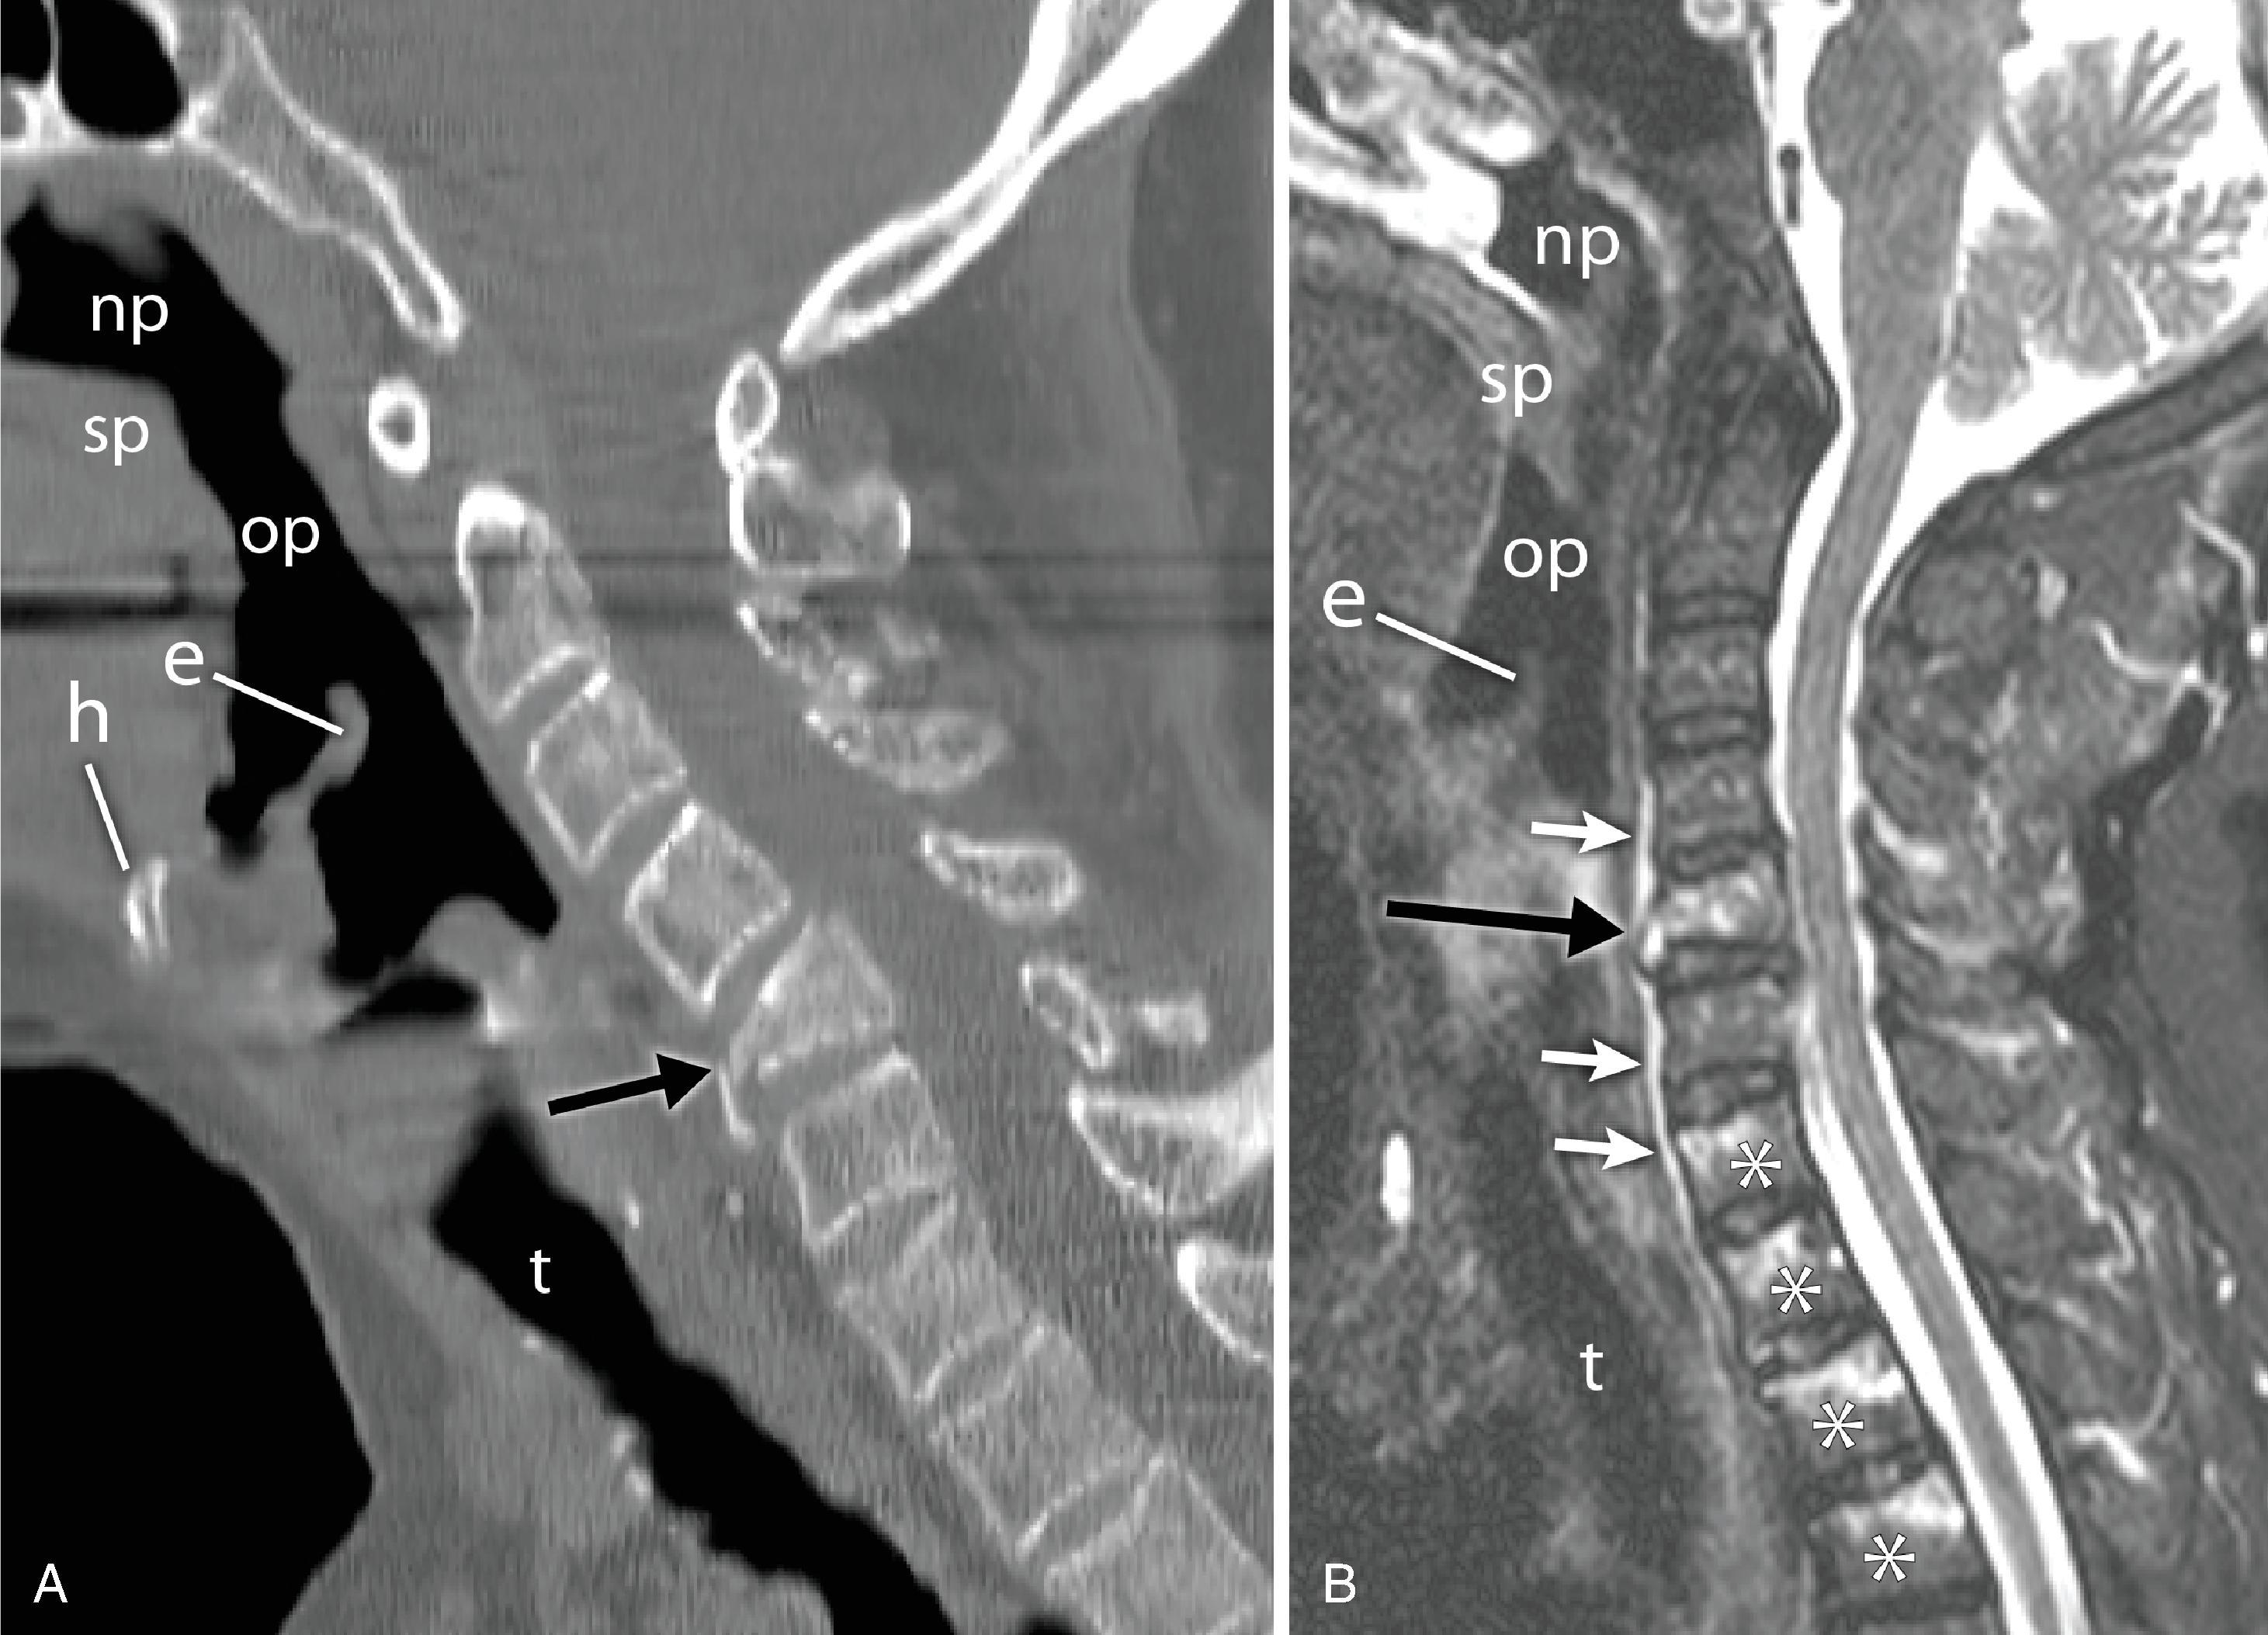 Fig. 2.13, (A) Sagittal computed tomography (CT) image shows anterior wedge deformity of the C5 vertebral body with fracture lines ( arrow ). There is bony retropulsion impinging the spinal canal. (B) Sagittal short-tau inversion recovery magnetic resonance (MR) image shows marrow edema associated with C5 fracture ( long black arrow ). There is trace prevertebral edema ( short white arrows ) suggestive of ligamentous injury. Marrow edema ( asterisks ) is seen in additional vertebrae without significant height loss, indicating subtle fractures not clearly evident on CT. np , nasopharynx; sp , soft palate; op , oropharynx; h , hyoid bone; e , Epiglottis; t , trachea.